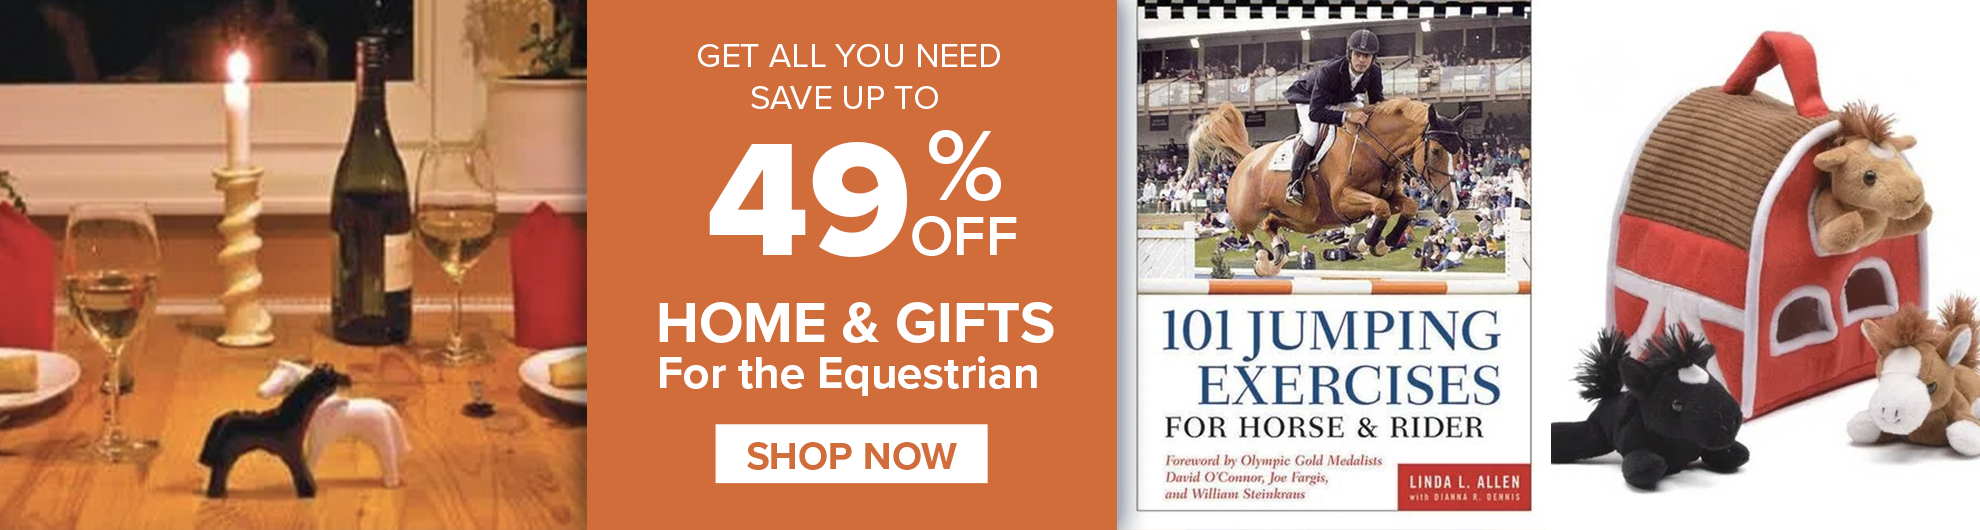 Shop for Equestrian Home & Gift